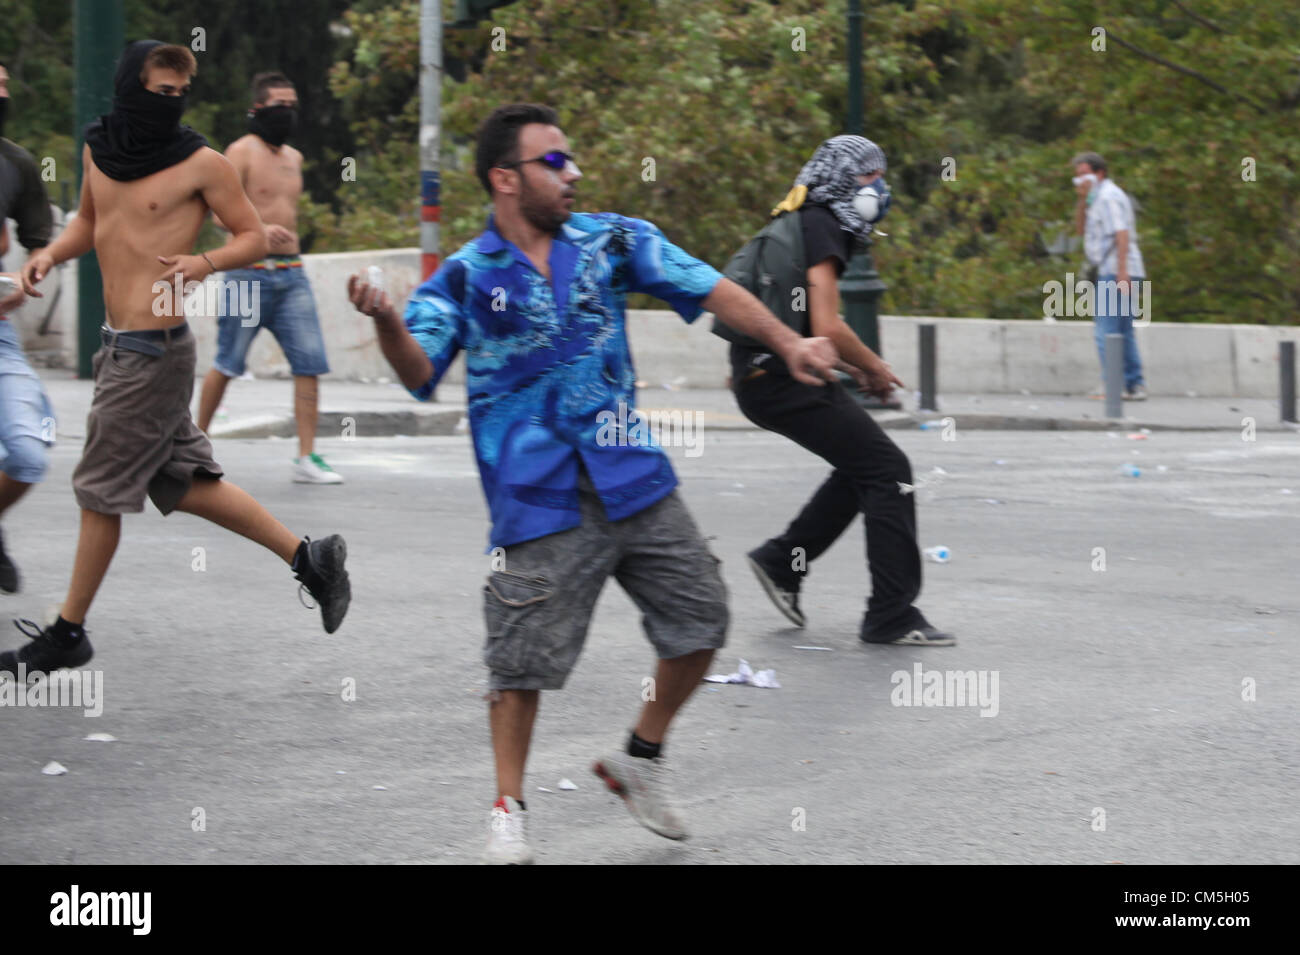 Tuesday 09 October 2012  Pictured: Protesters throwing stones to riot police in Syntagma Square, infront of the Greek Parliament.  Re: German Chancellor Angela Merkel has pledged her country's continuing support to Greece, during her first visit to Athens since the eurozone crisis erupted nearly three years ago.  Mrs Merkel said Greece had made good progress in dealing with its vast debt but that it was on a 'difficult path'.  Thousands of people who blame Germany for forcing painful austerity measures on Greece are protesting in Athens.  Police have used teargas and stun grenades against demo Stock Photo